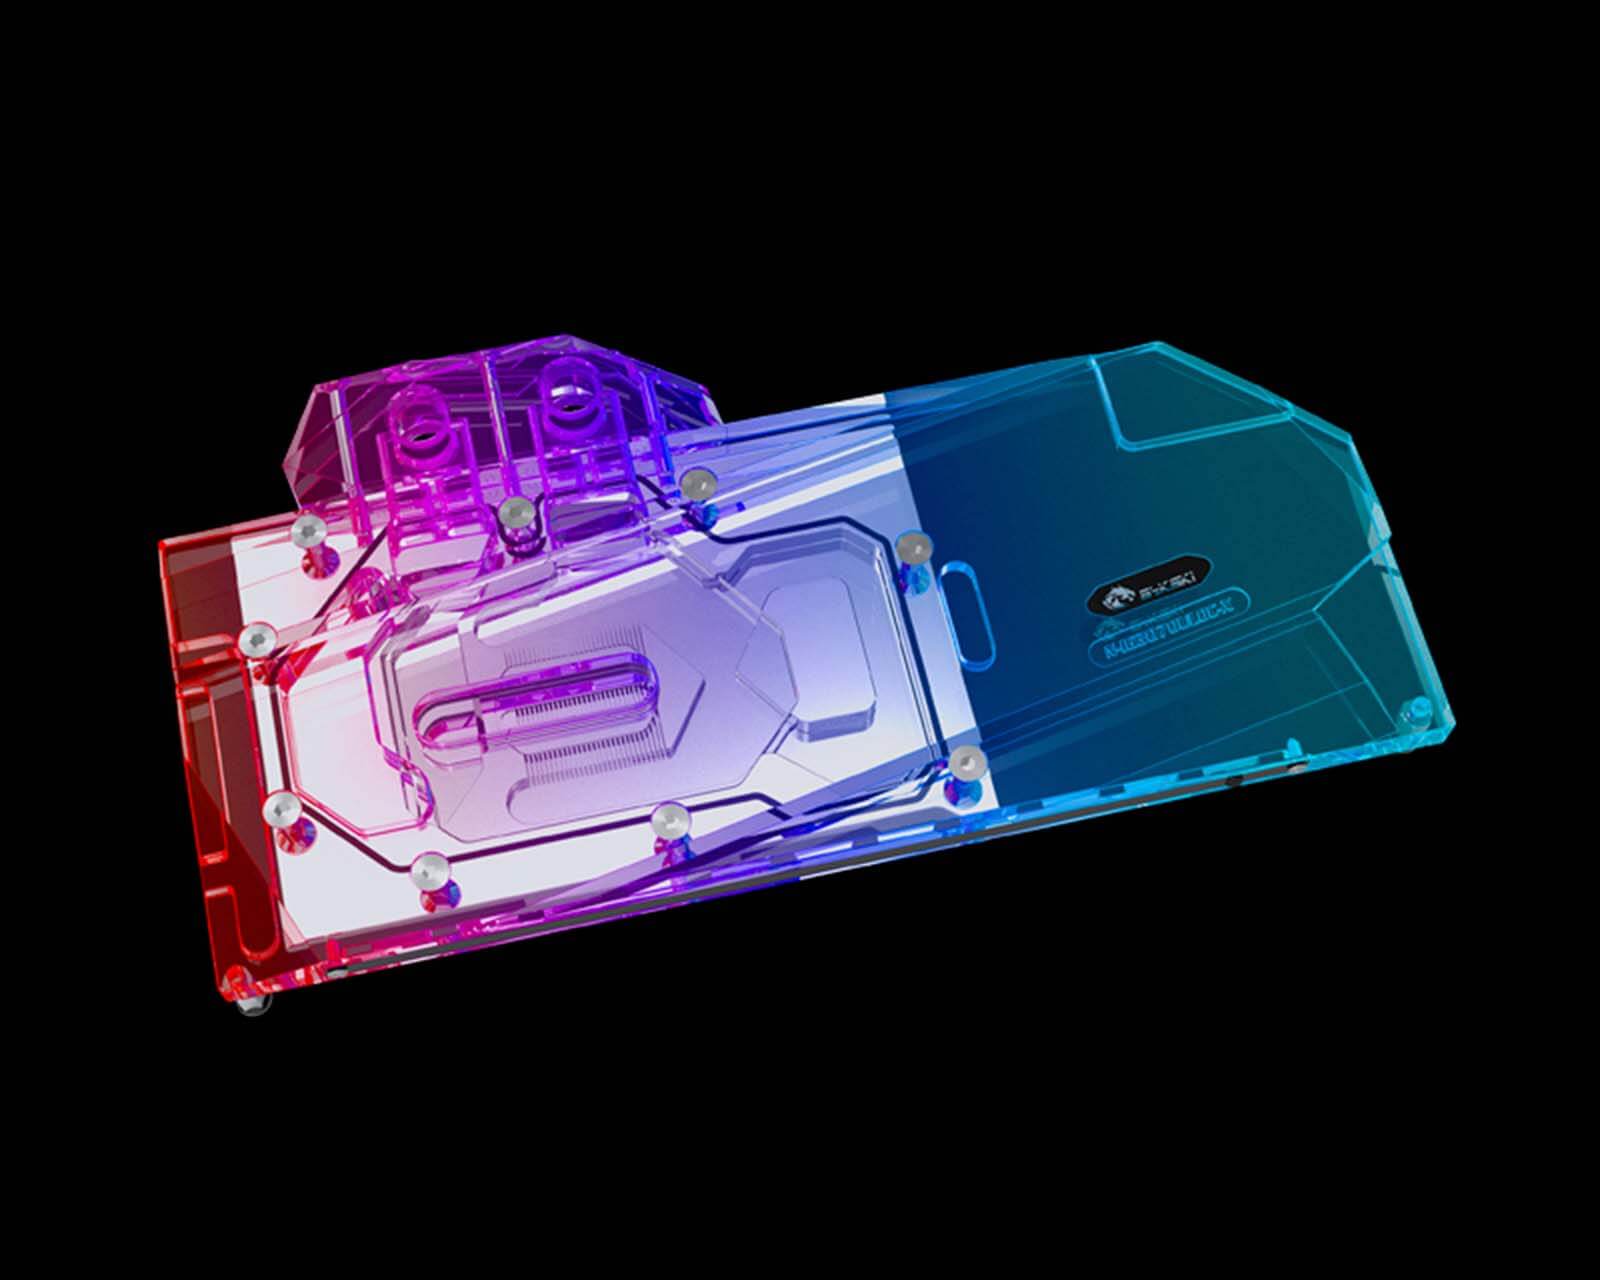 Bykski Full Coverage GPU Water Block and Backplate for Colorful iGame RTX 3070 Advanced OC (N-IG3070ULOC-X) - PrimoChill - KEEPING IT COOL